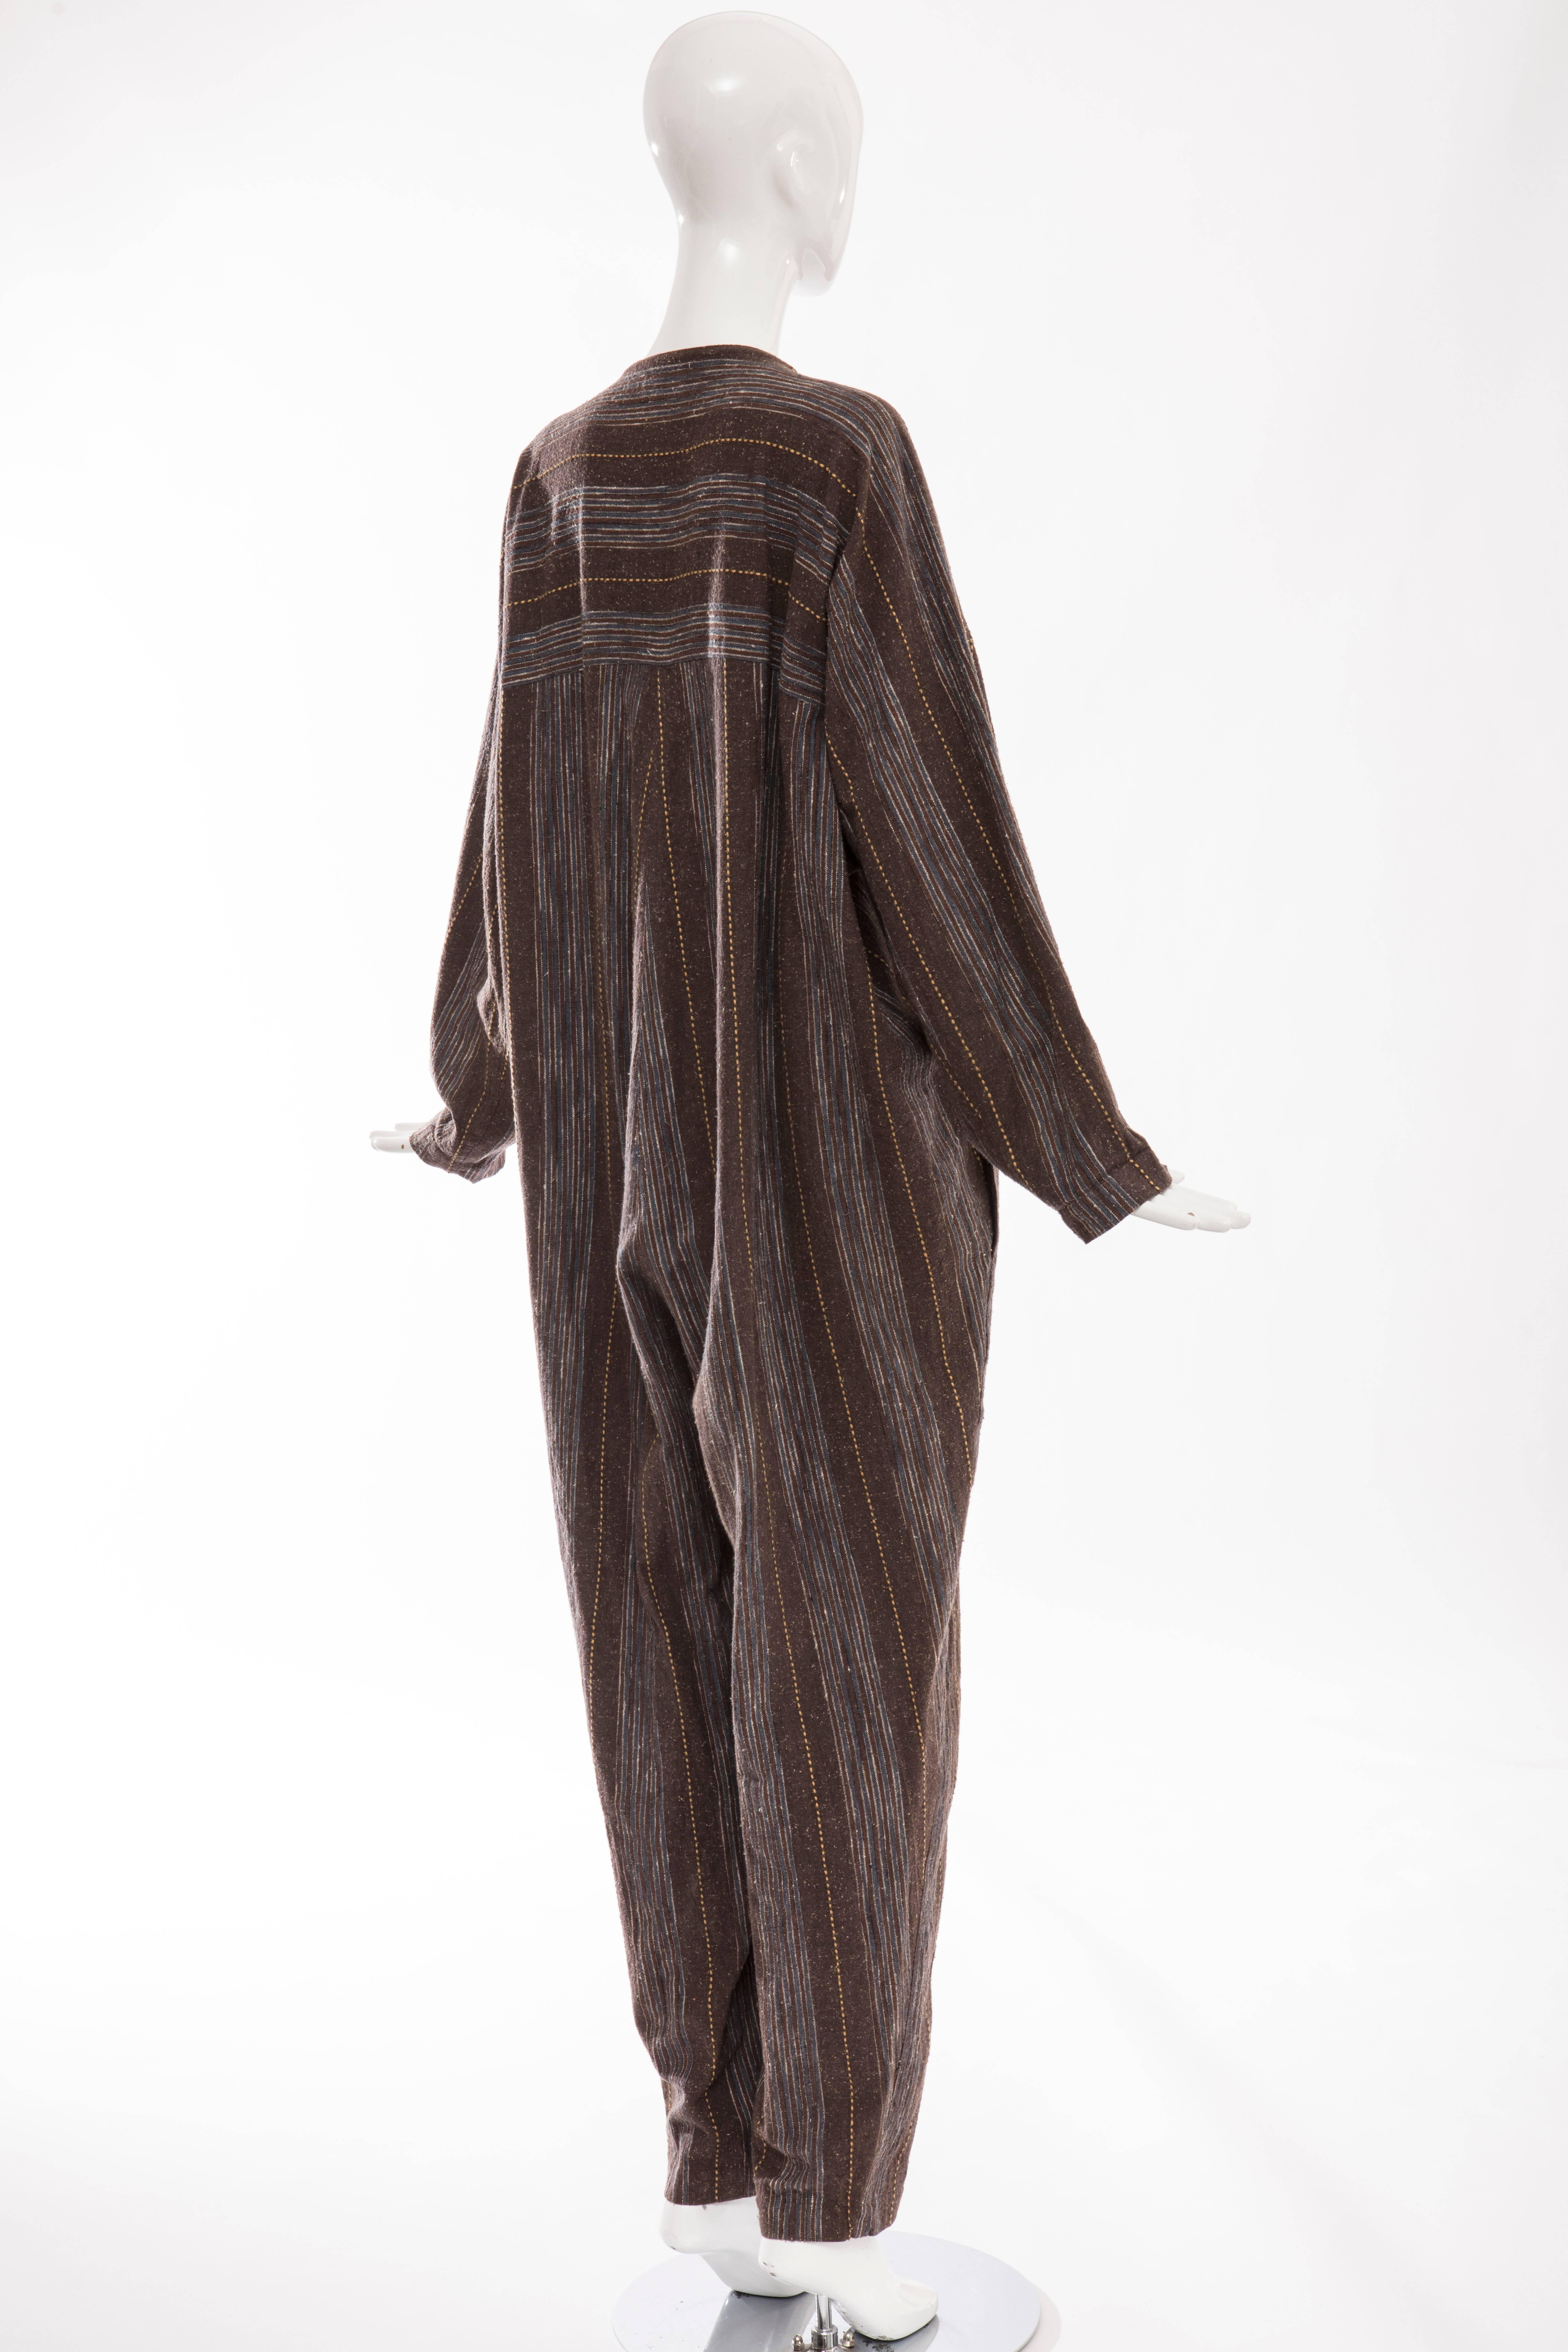 Issey Miyake Plantation Striped Woven Cotton Jumpsuit, Circa 1980s In Excellent Condition For Sale In Cincinnati, OH